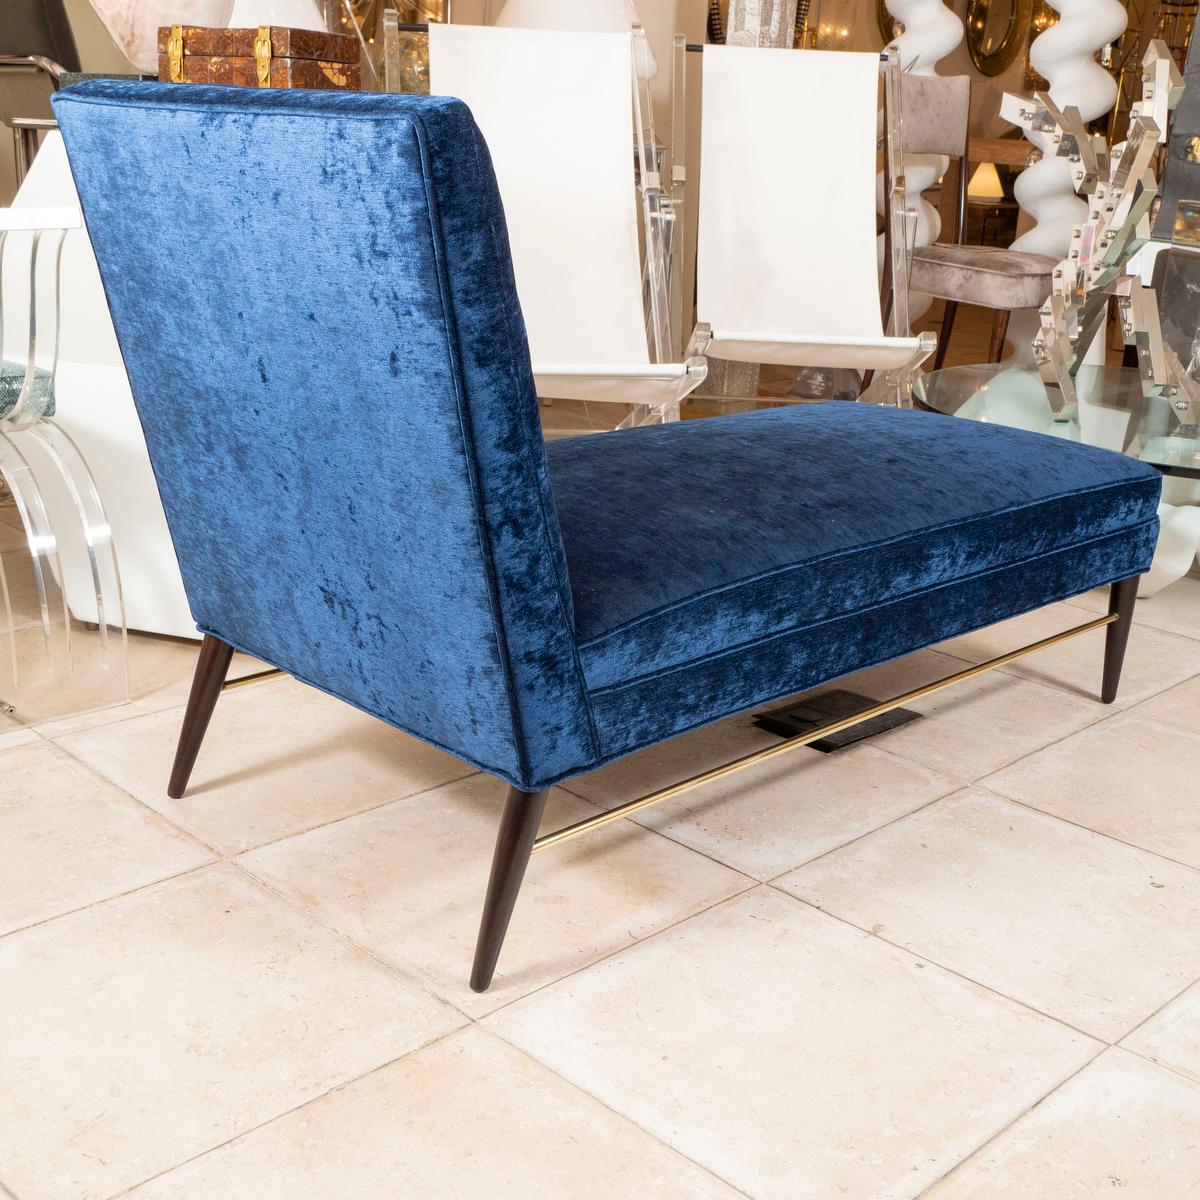 Wood and brass upholstered chaise lounge by Paul McCobb. Upholstered in a dark blue velvet fabric.